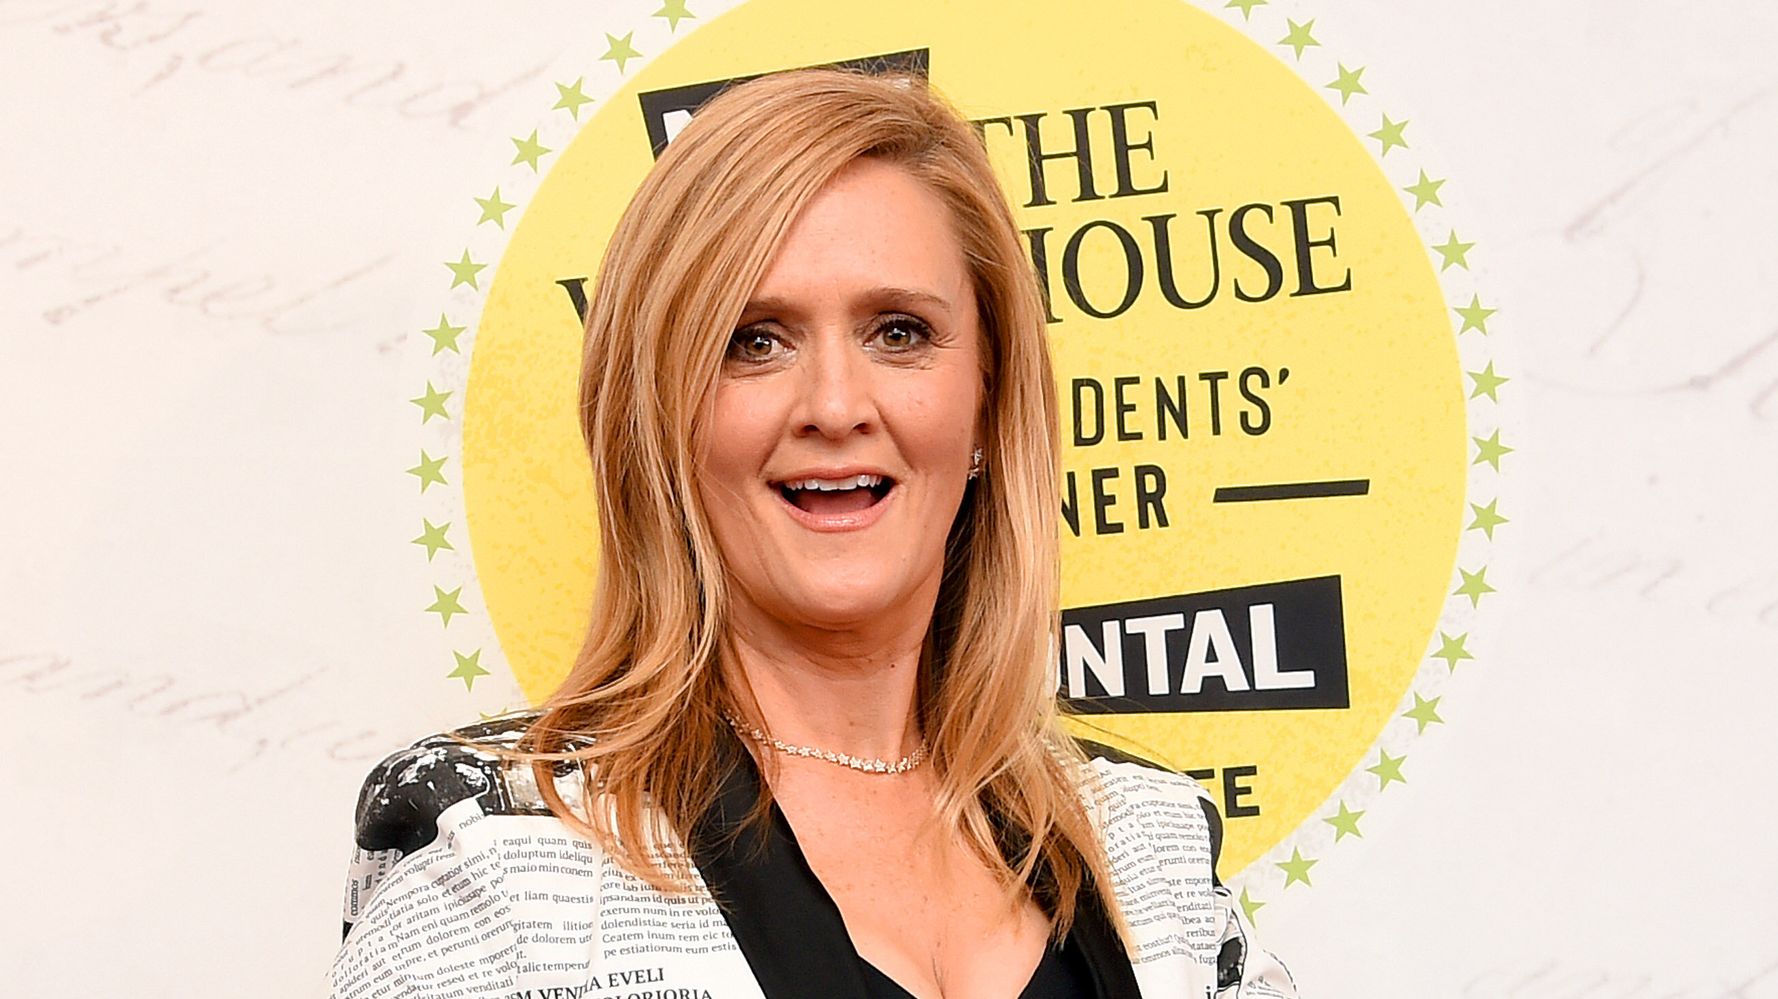 TBS Cancels 'Full Frontal With Samantha Bee' After 7 Seasons